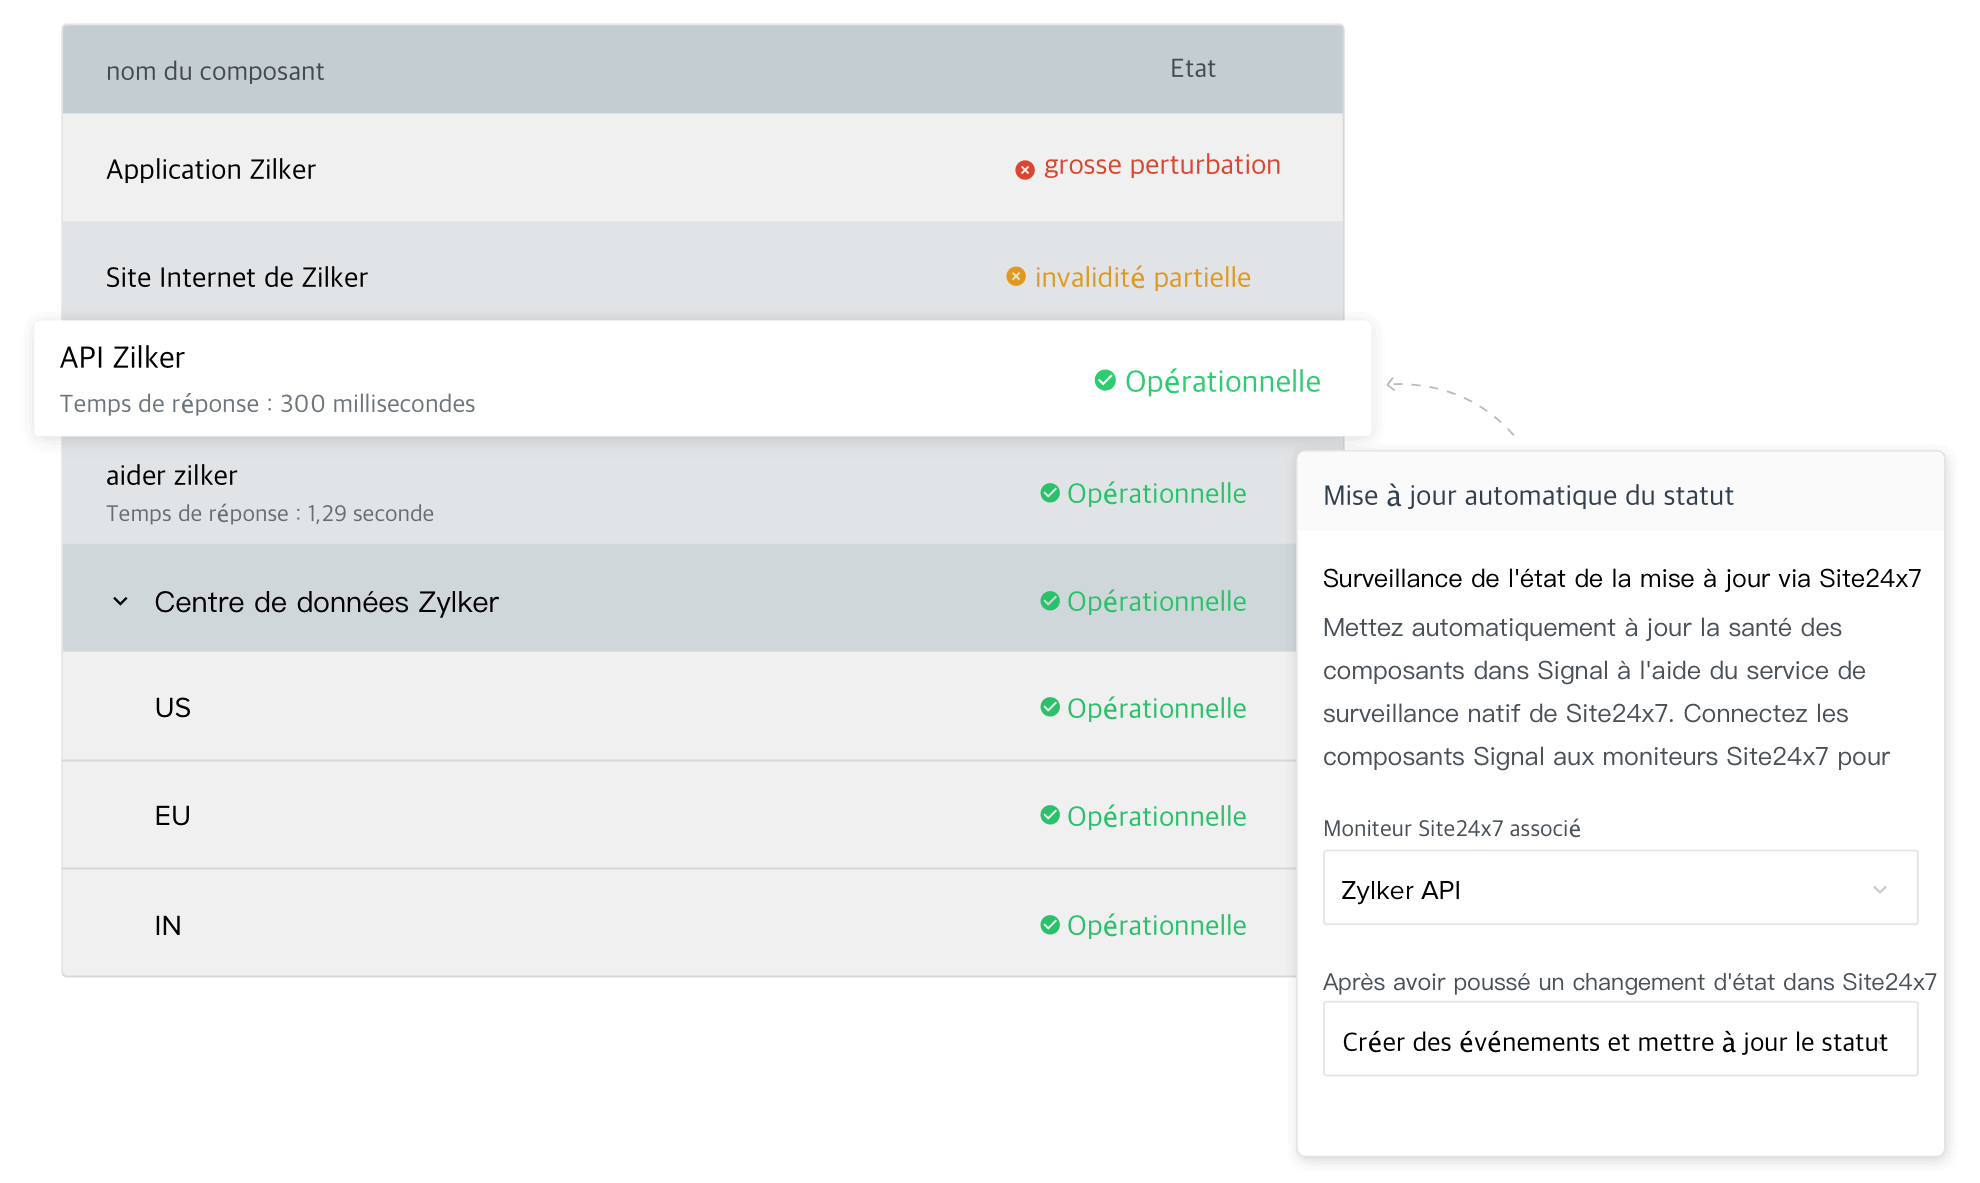 How you can sync status updates of components via Site24x7